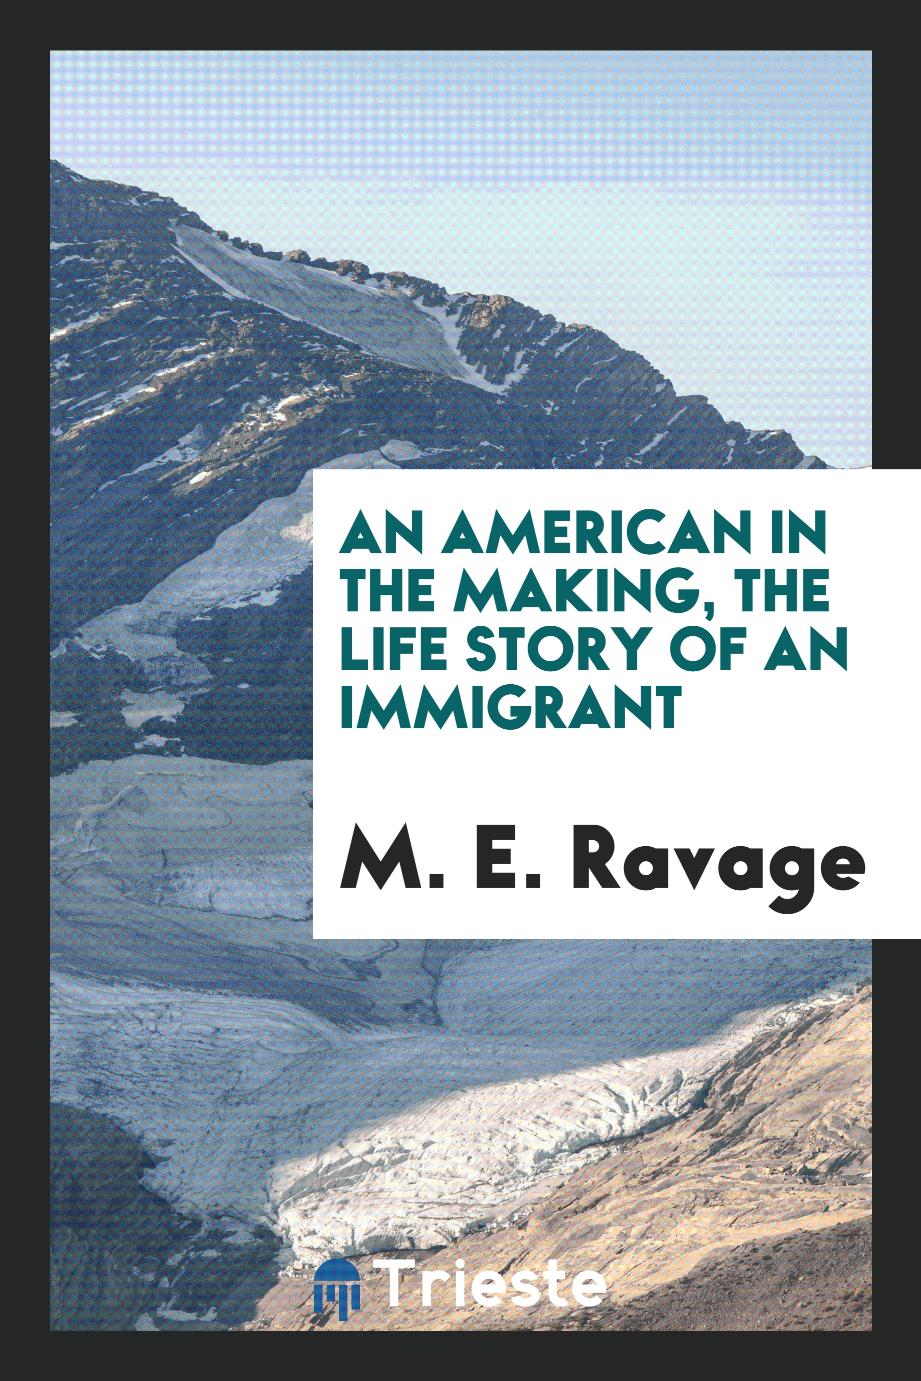 An American in the making, the life story of an immigrant